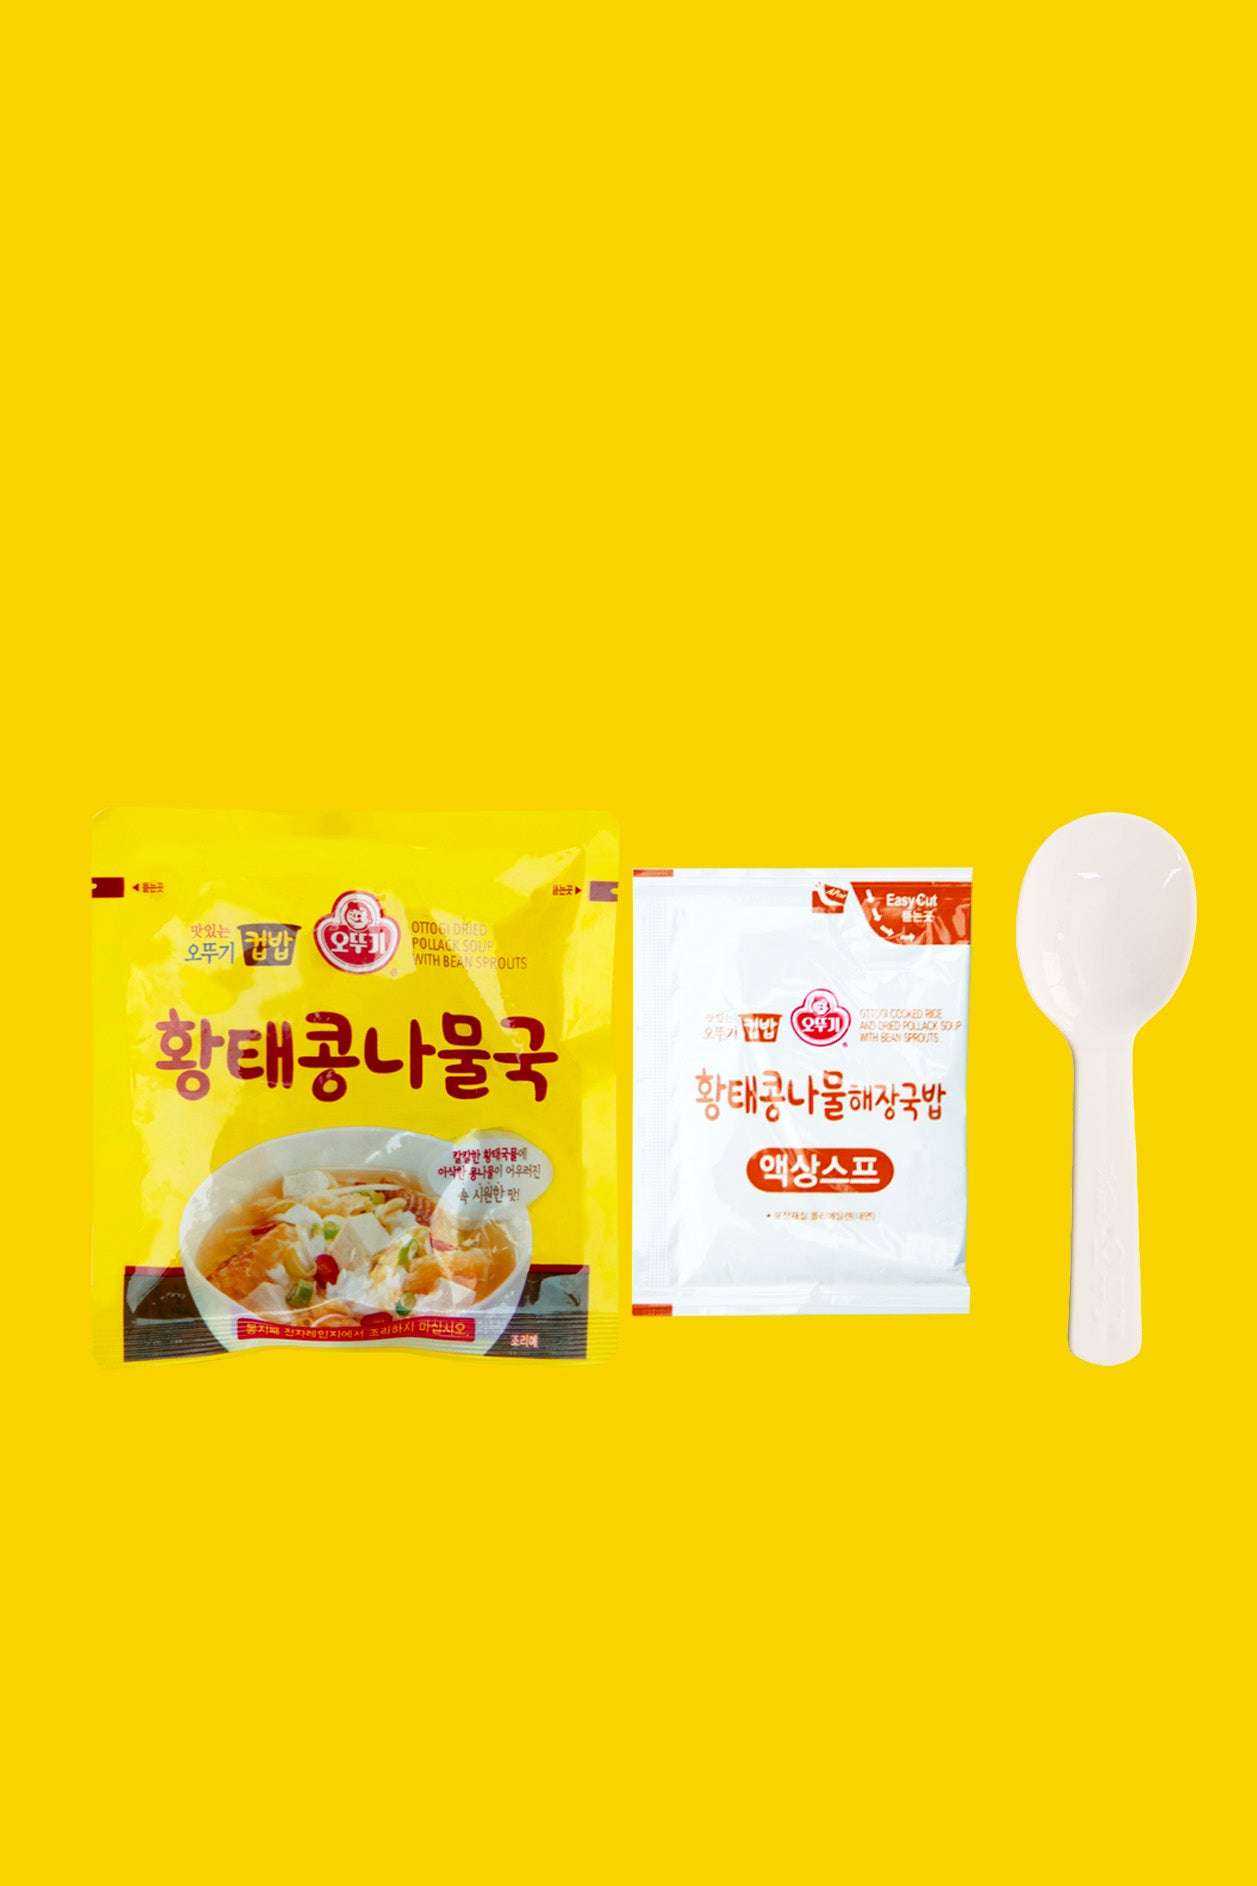 Cup Bap - Dried Pollack & Bean Sprout Soup 301.5g